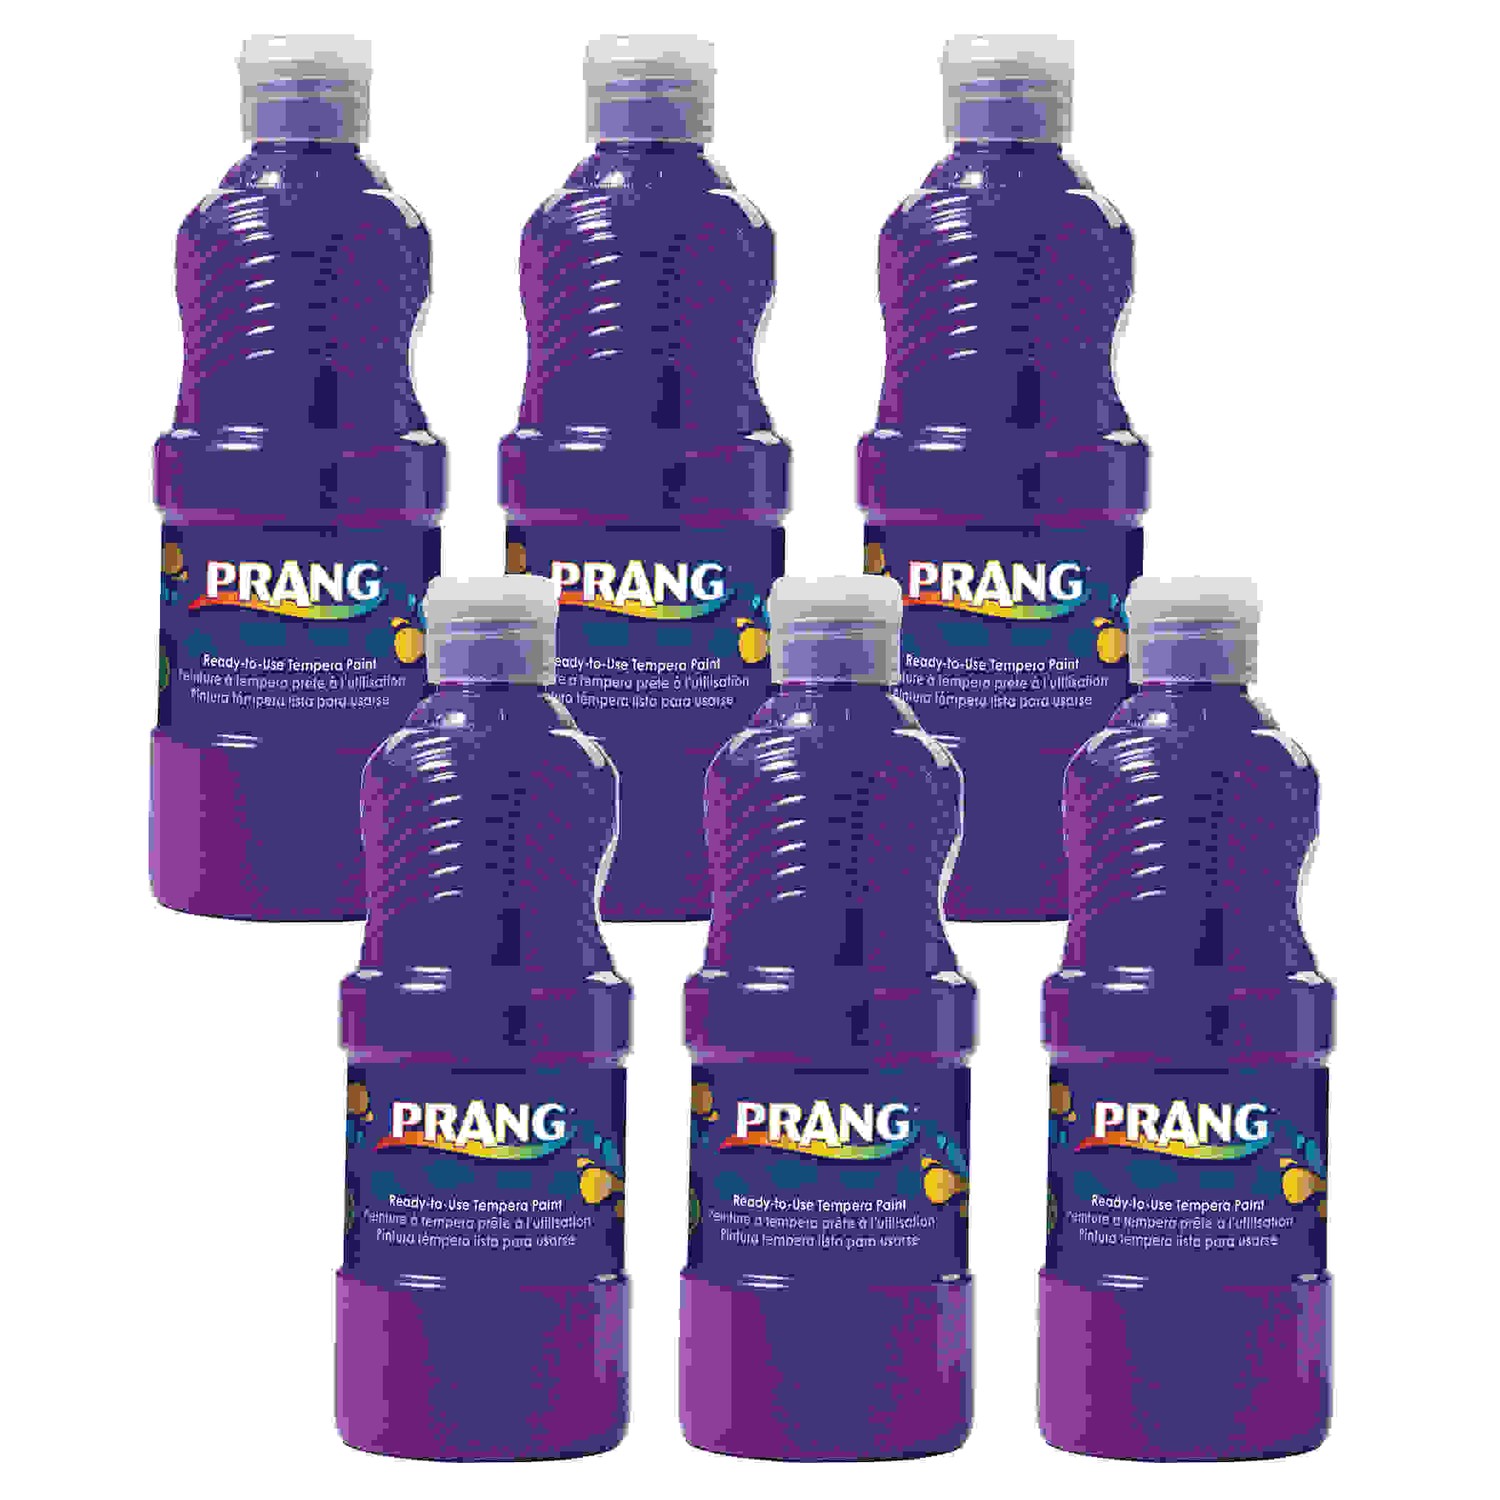 Ready-to-Use Tempera Paint, Violet, 16 oz, Pack of 6